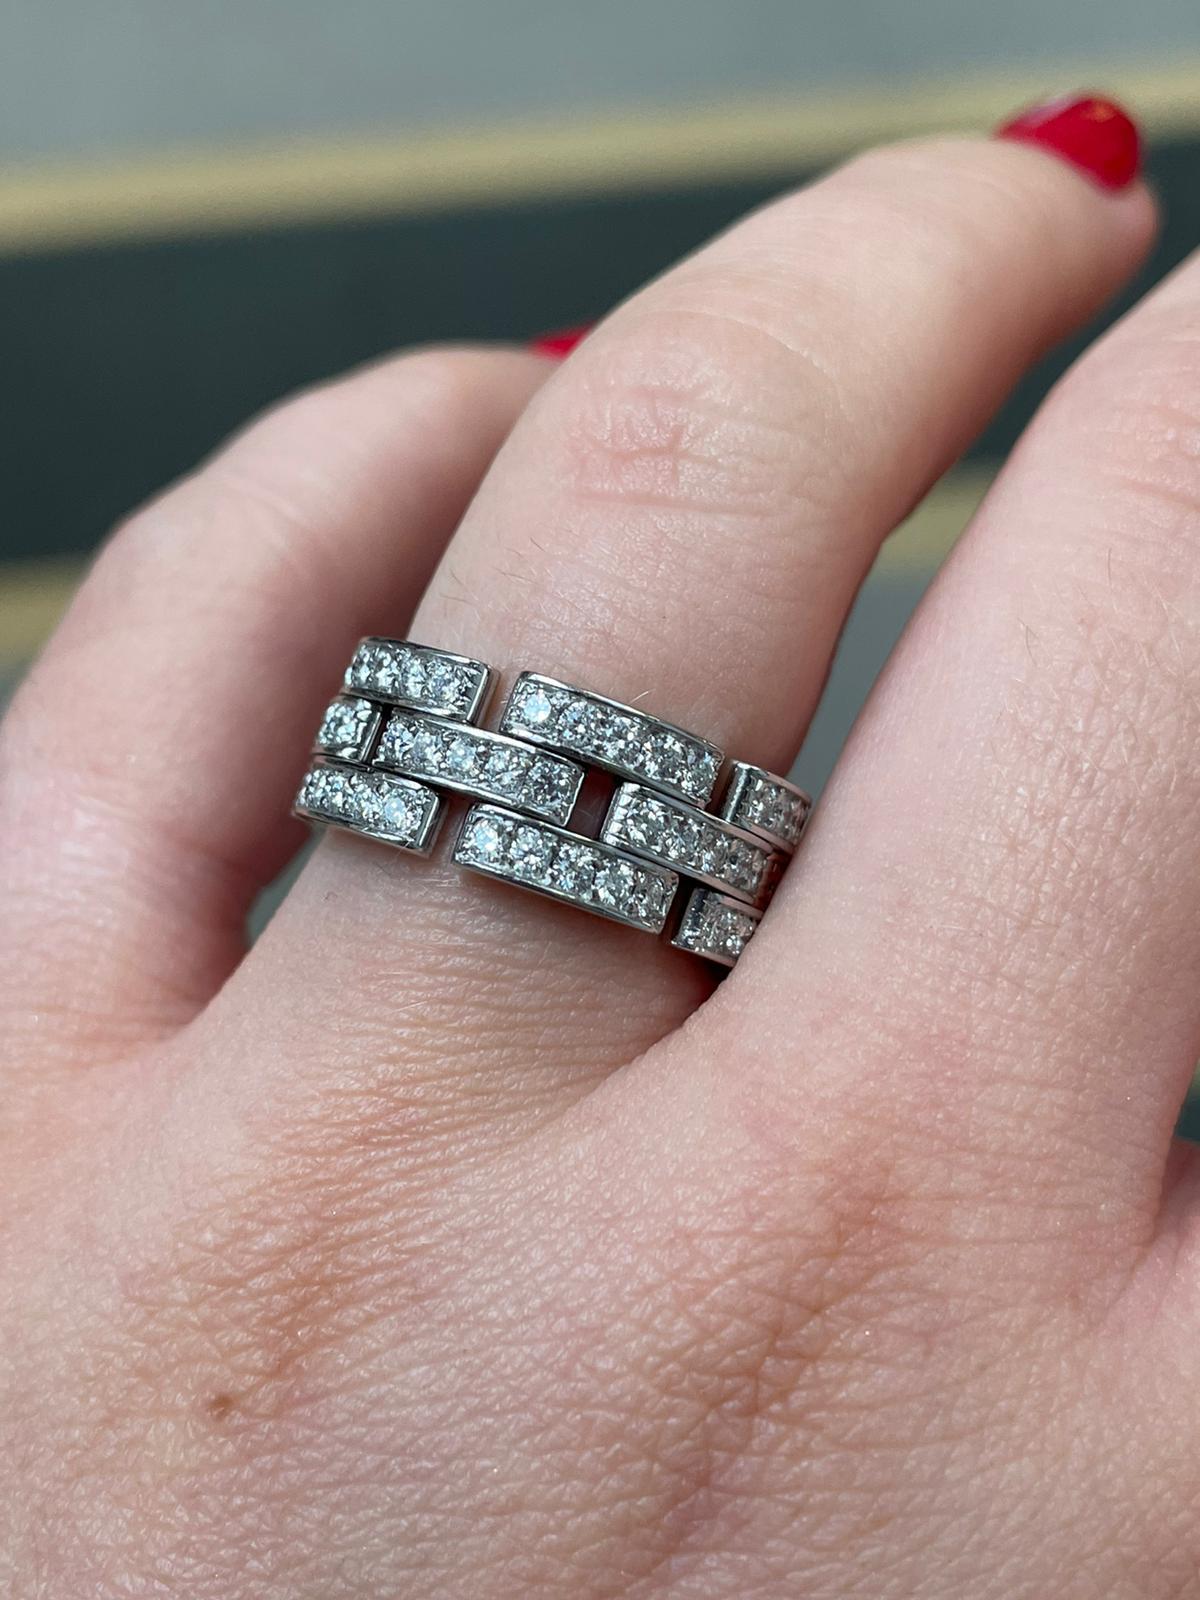 A beautiful Cartier Maillon Panthère diamond set ring, crafted in 18 karat white gold, circa 2010.

The Panthère collection is named after Cartier's iconic mascot, this couldn't be more appropriate as the ring drapes elegantly over the finger of the